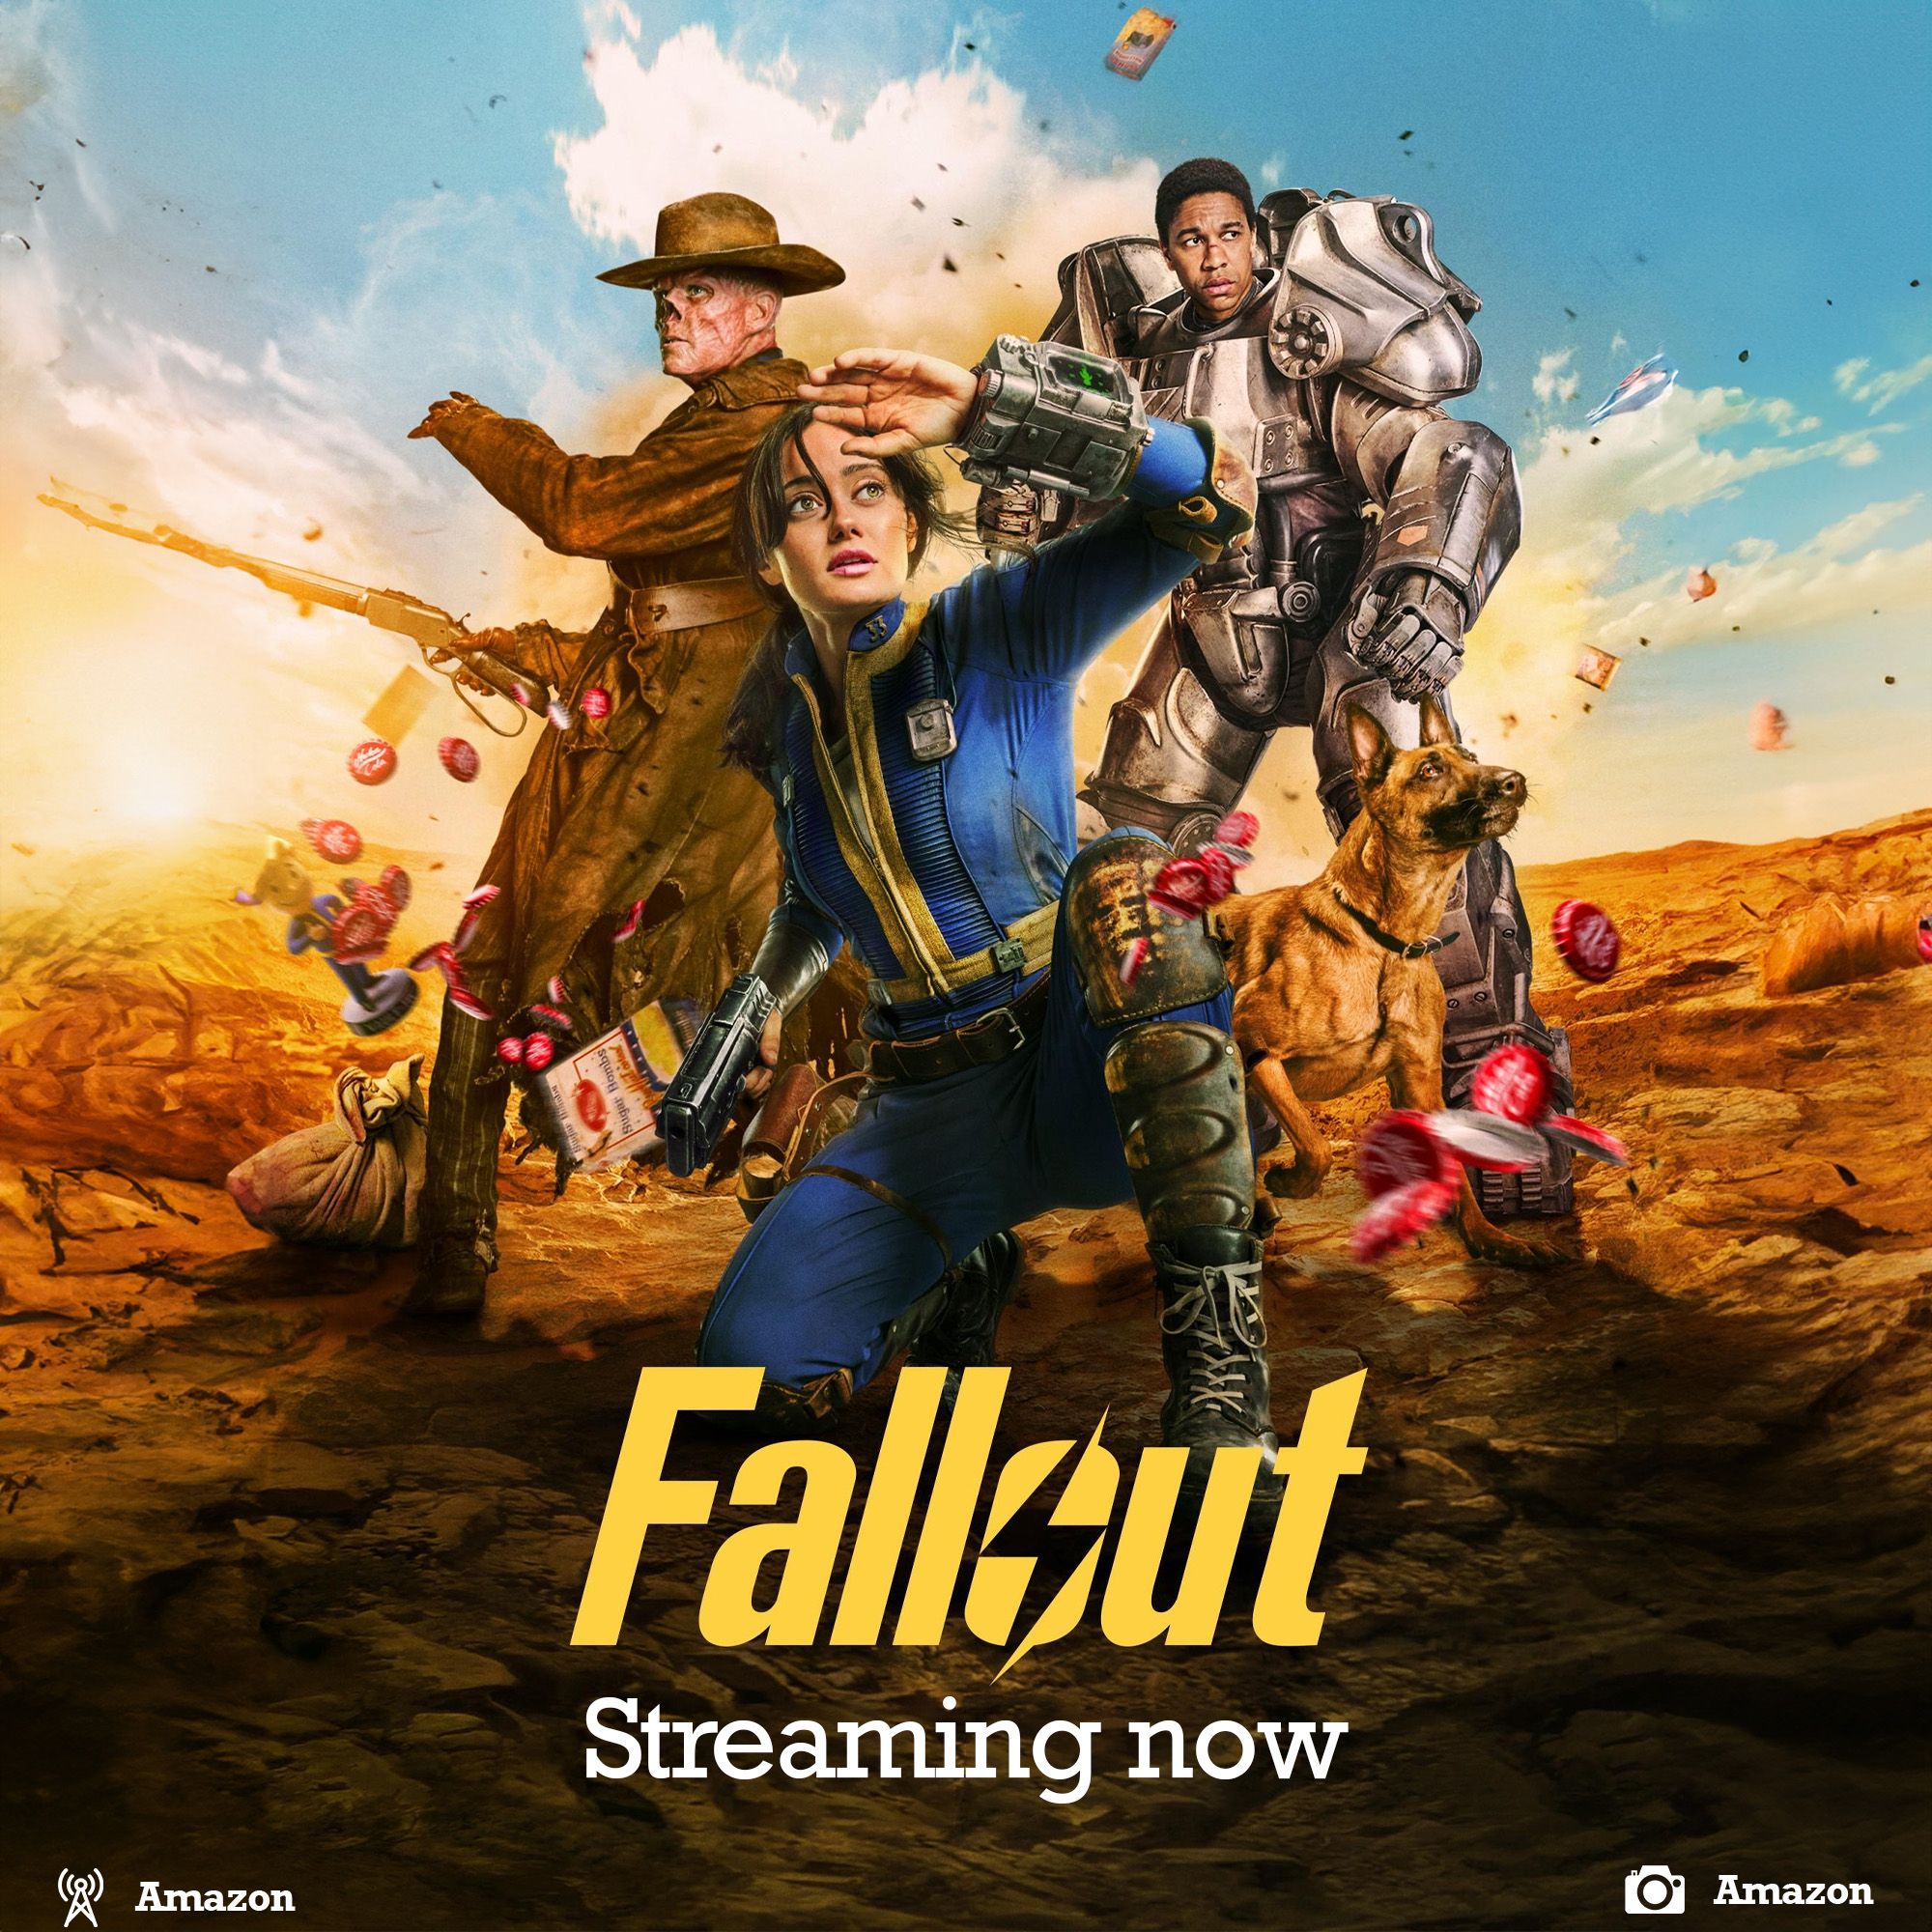 Fallout TV Series is streaming now